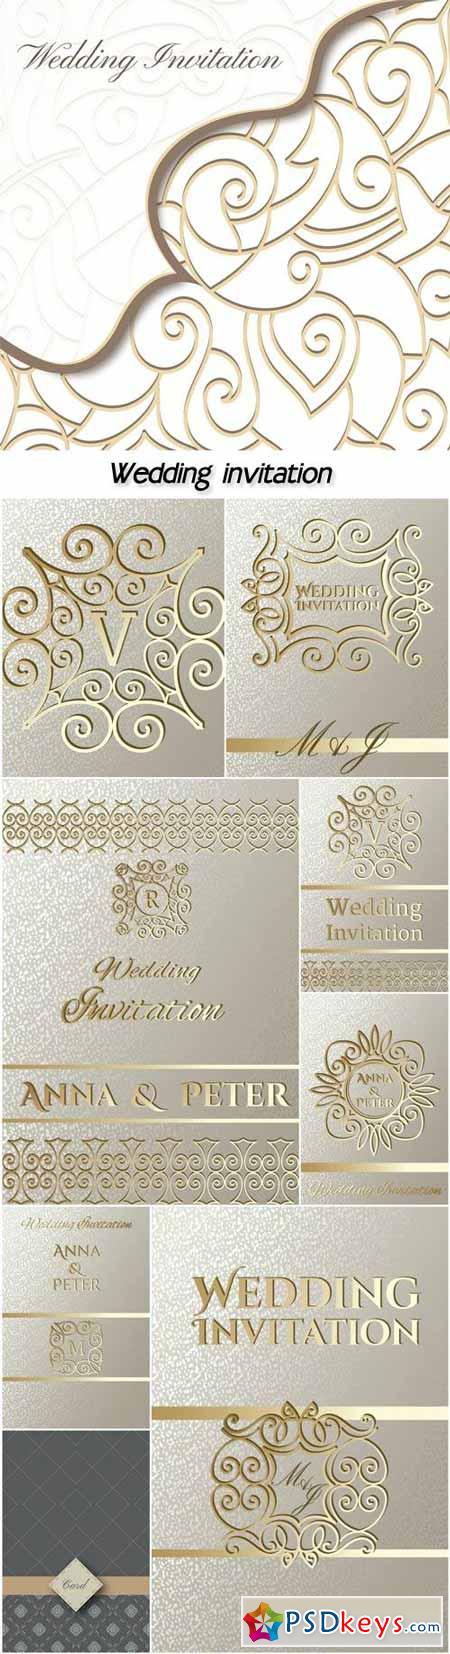 Wedding invitation, silver vector backgrounds with patterns